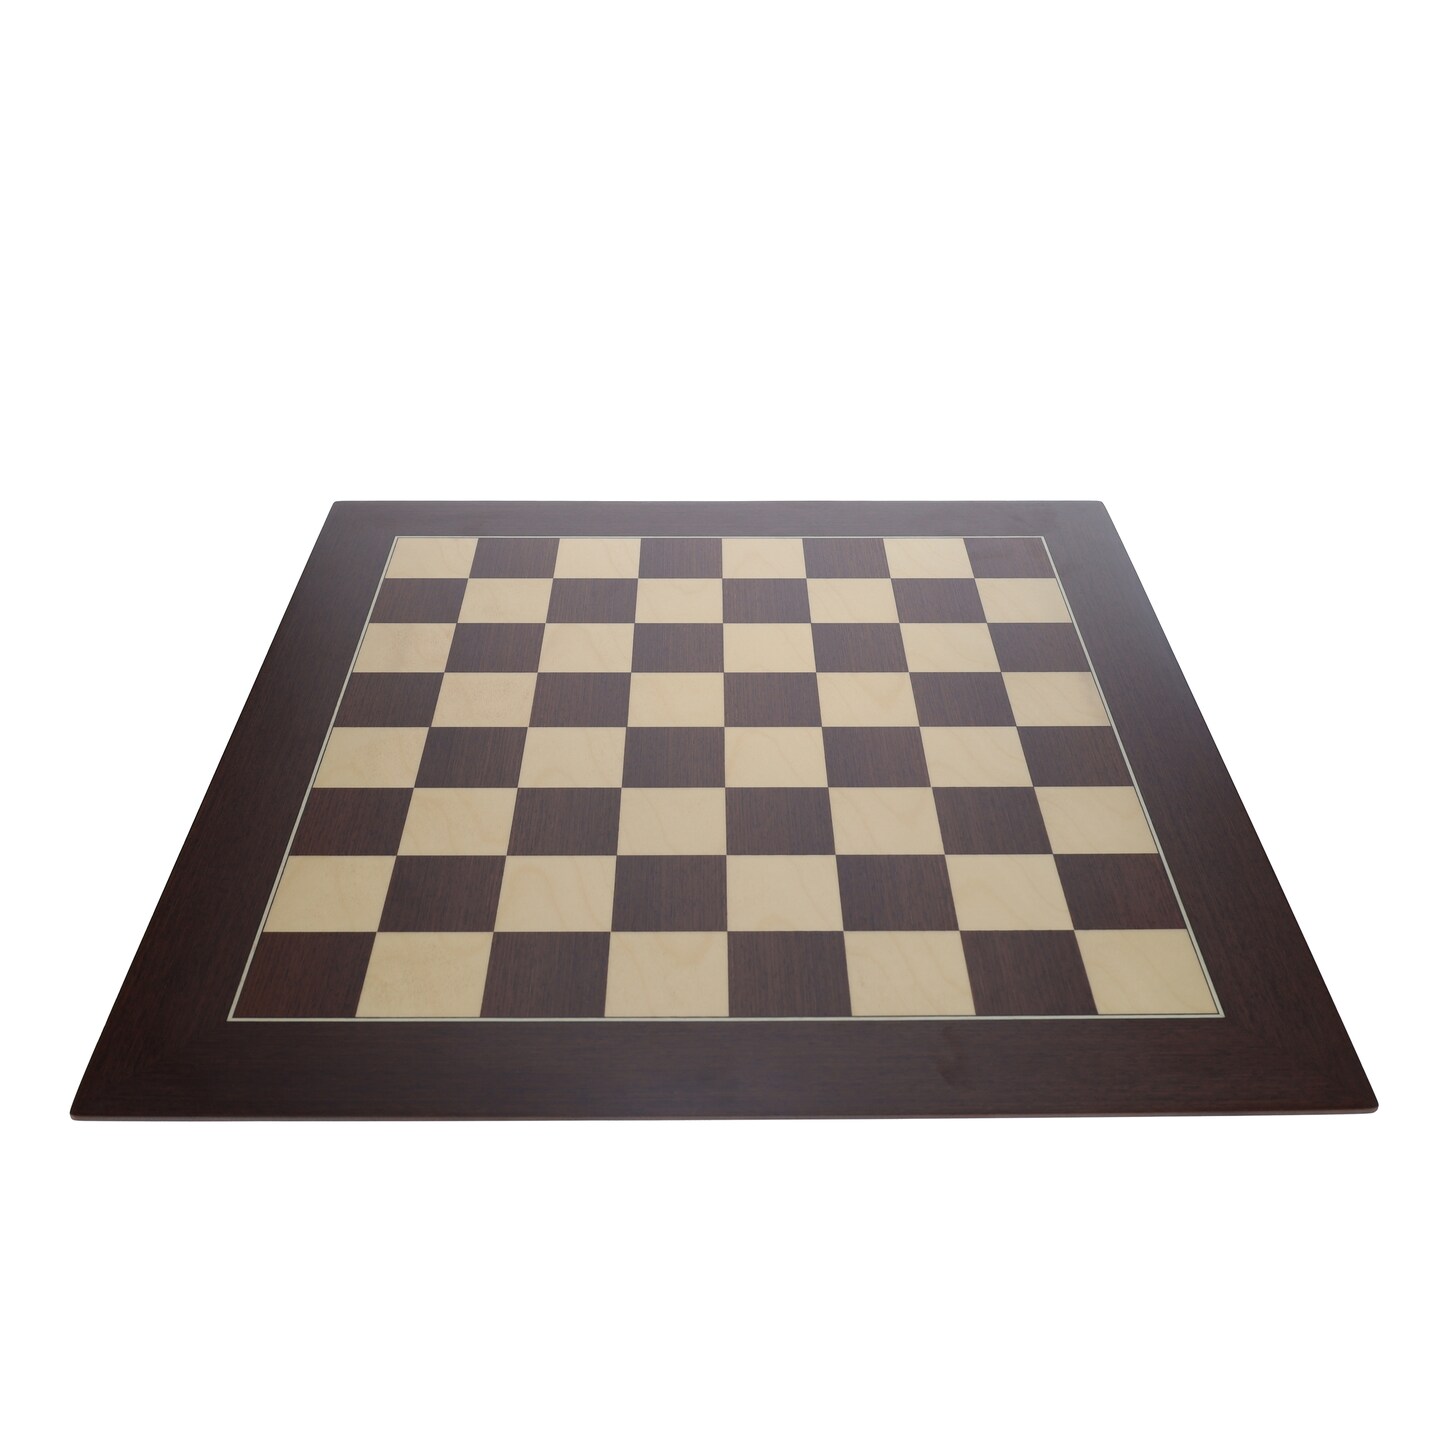 WE Games Deluxe Wenge and Sycamore Wooden Chess Board - 21.625 inches